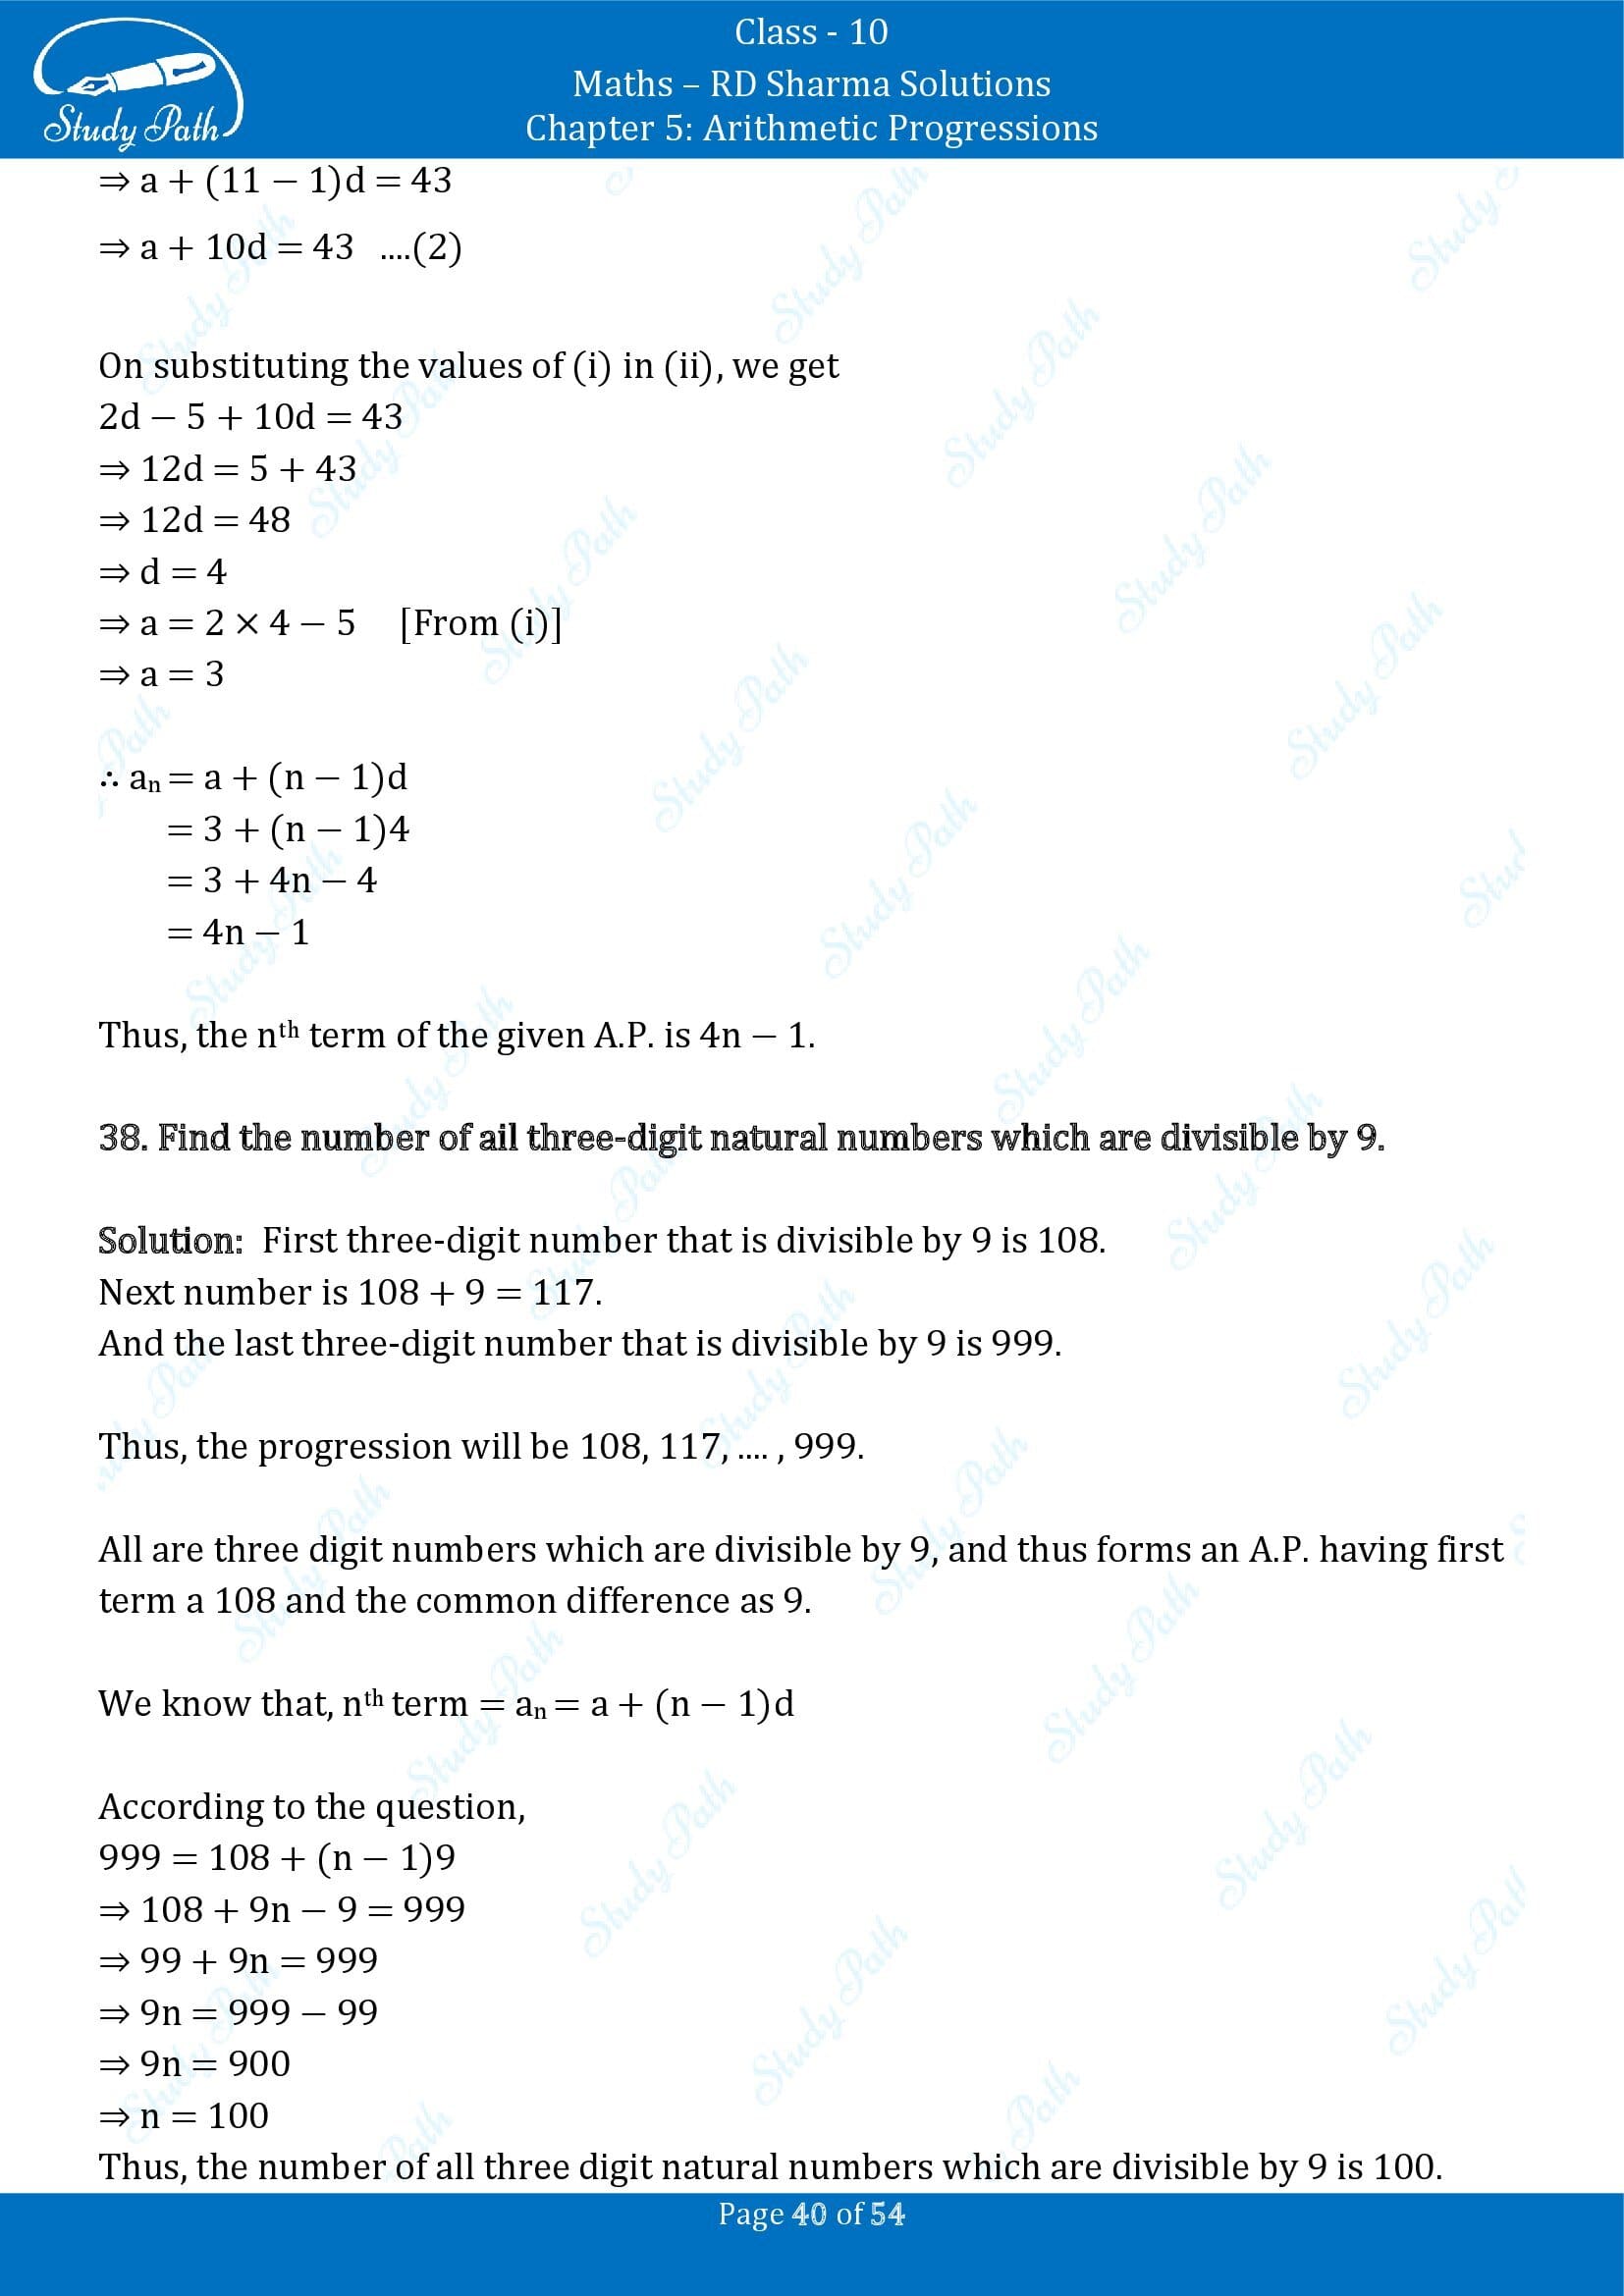 RD Sharma Solutions Class 10 Chapter 5 Arithmetic Progressions Exercise 5.4 00040